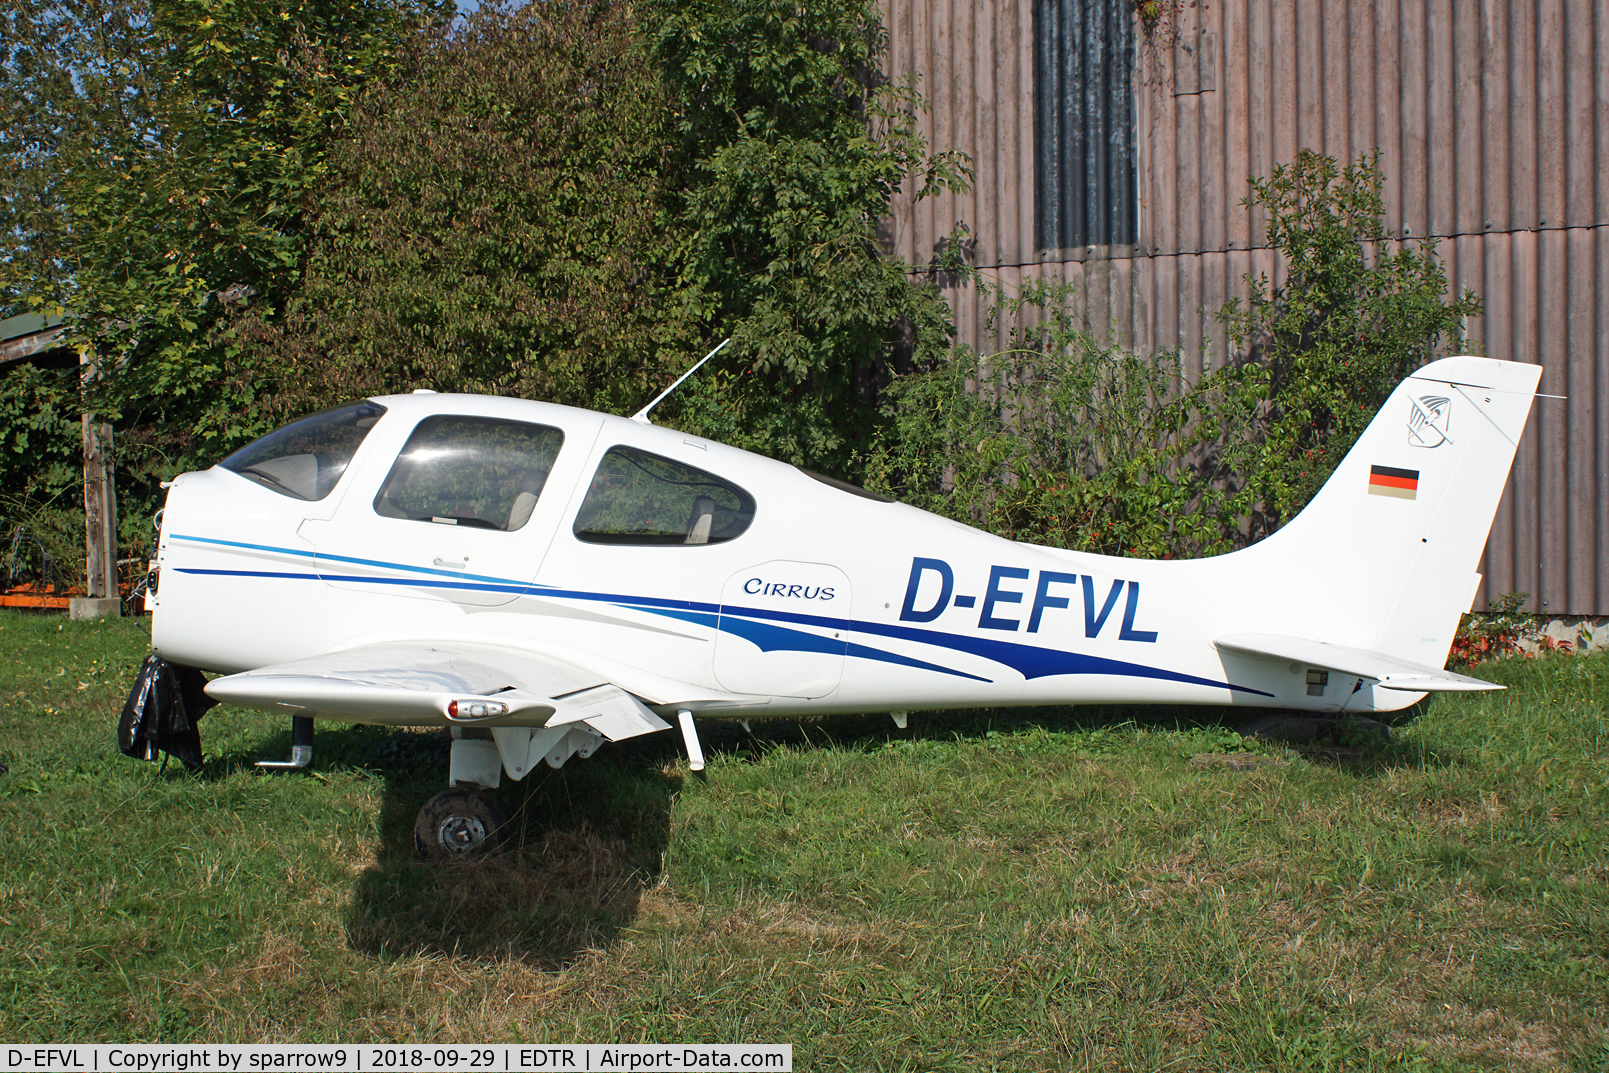 D-EFVL, 2004 Cirrus SR20 C/N 1403, Damaged. It will not be flown for some time, if ever.